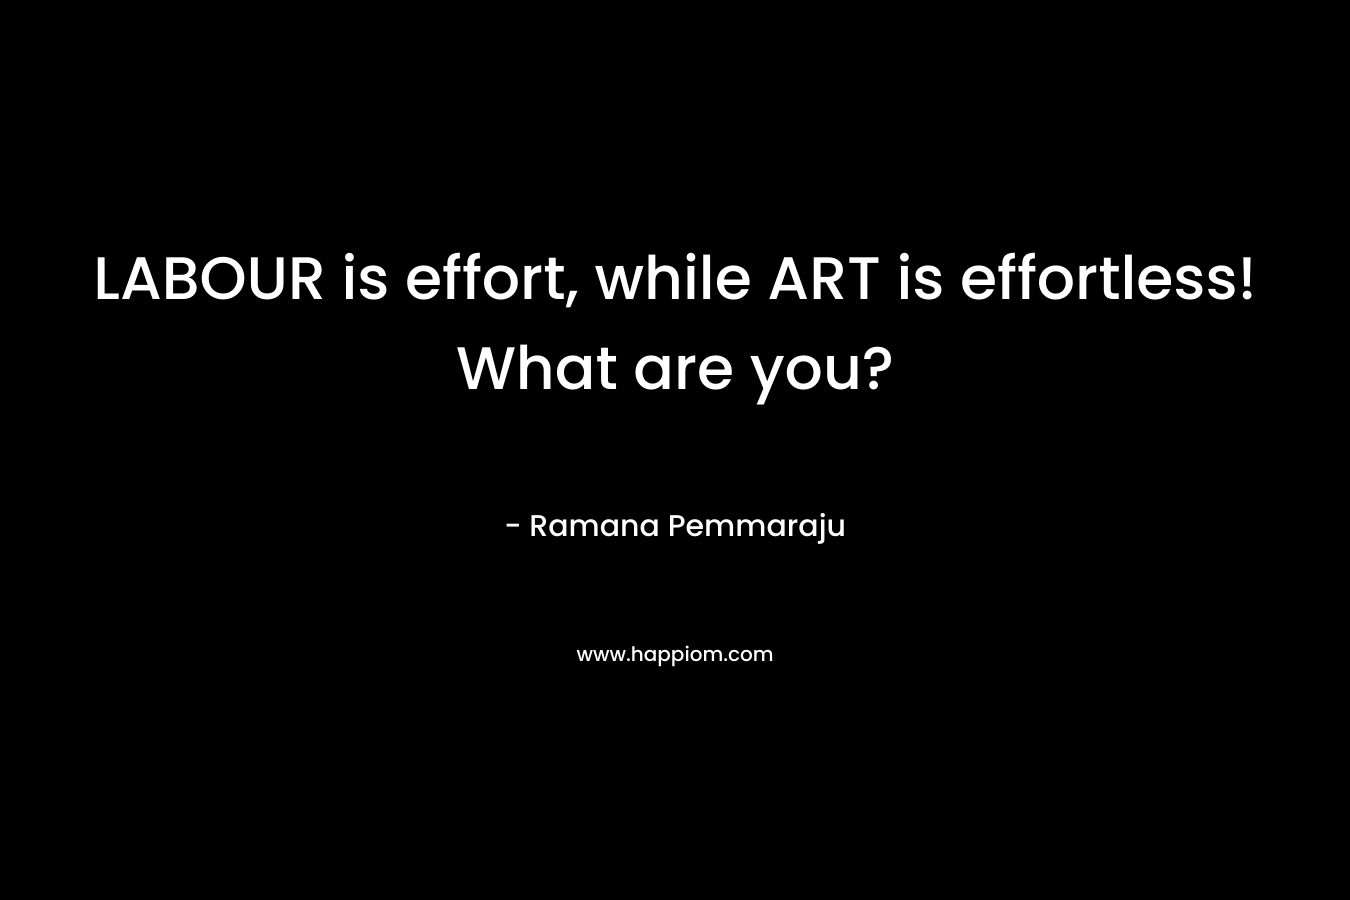 LABOUR is effort, while ART is effortless! What are you?